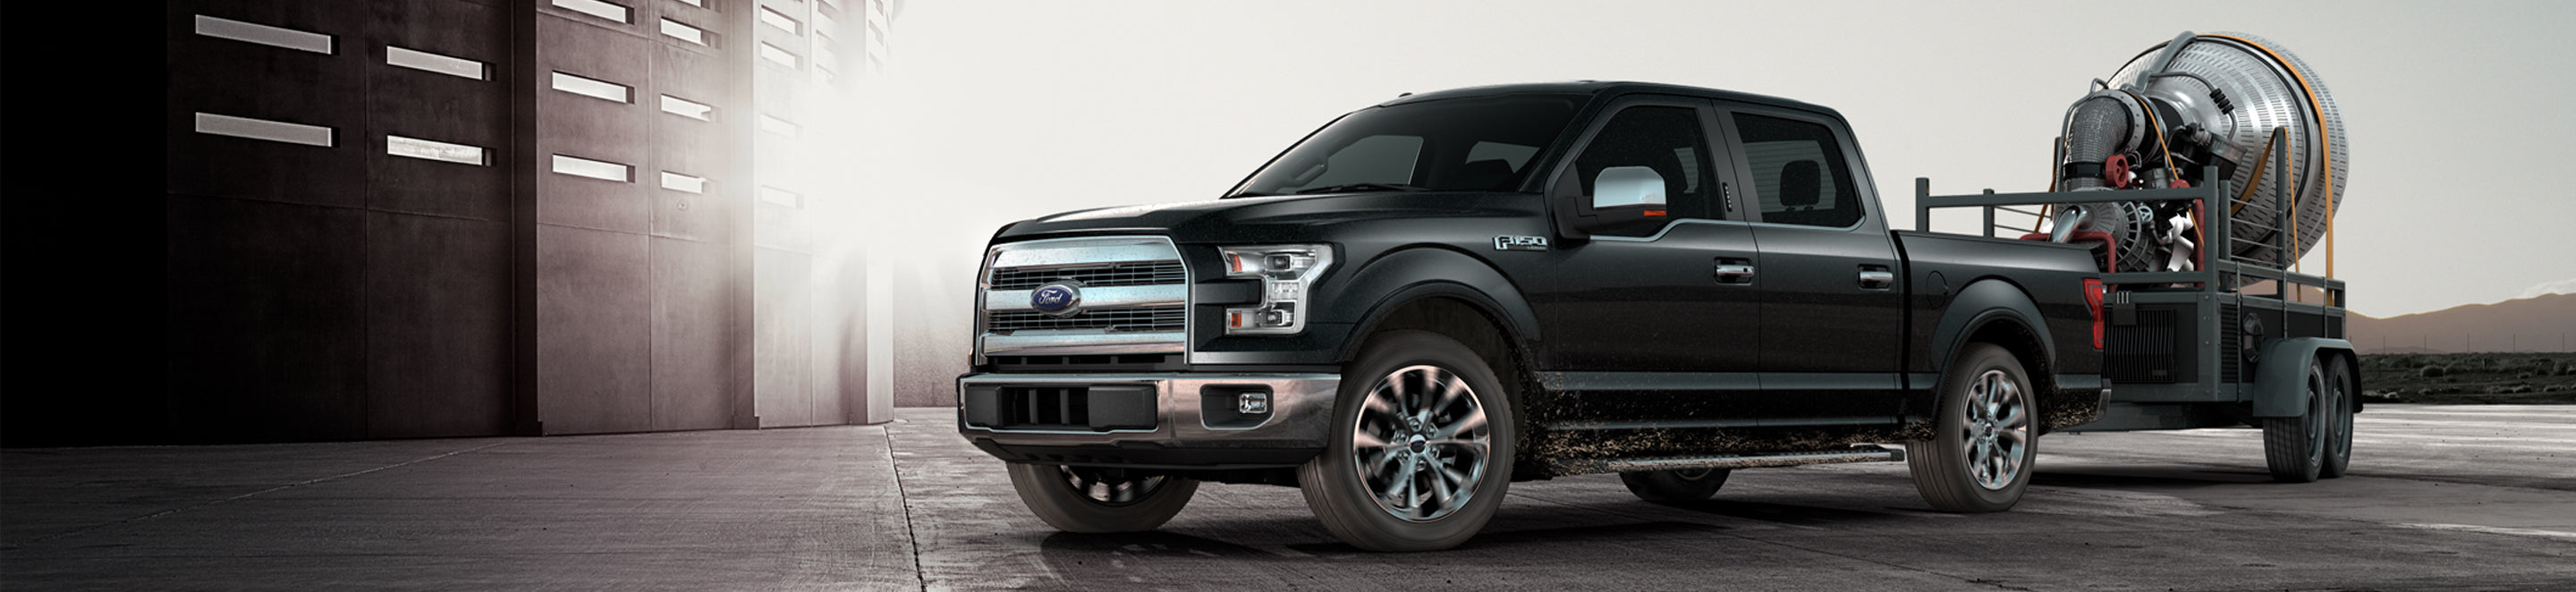 2015 Ford F-150 Accessories | Official Site